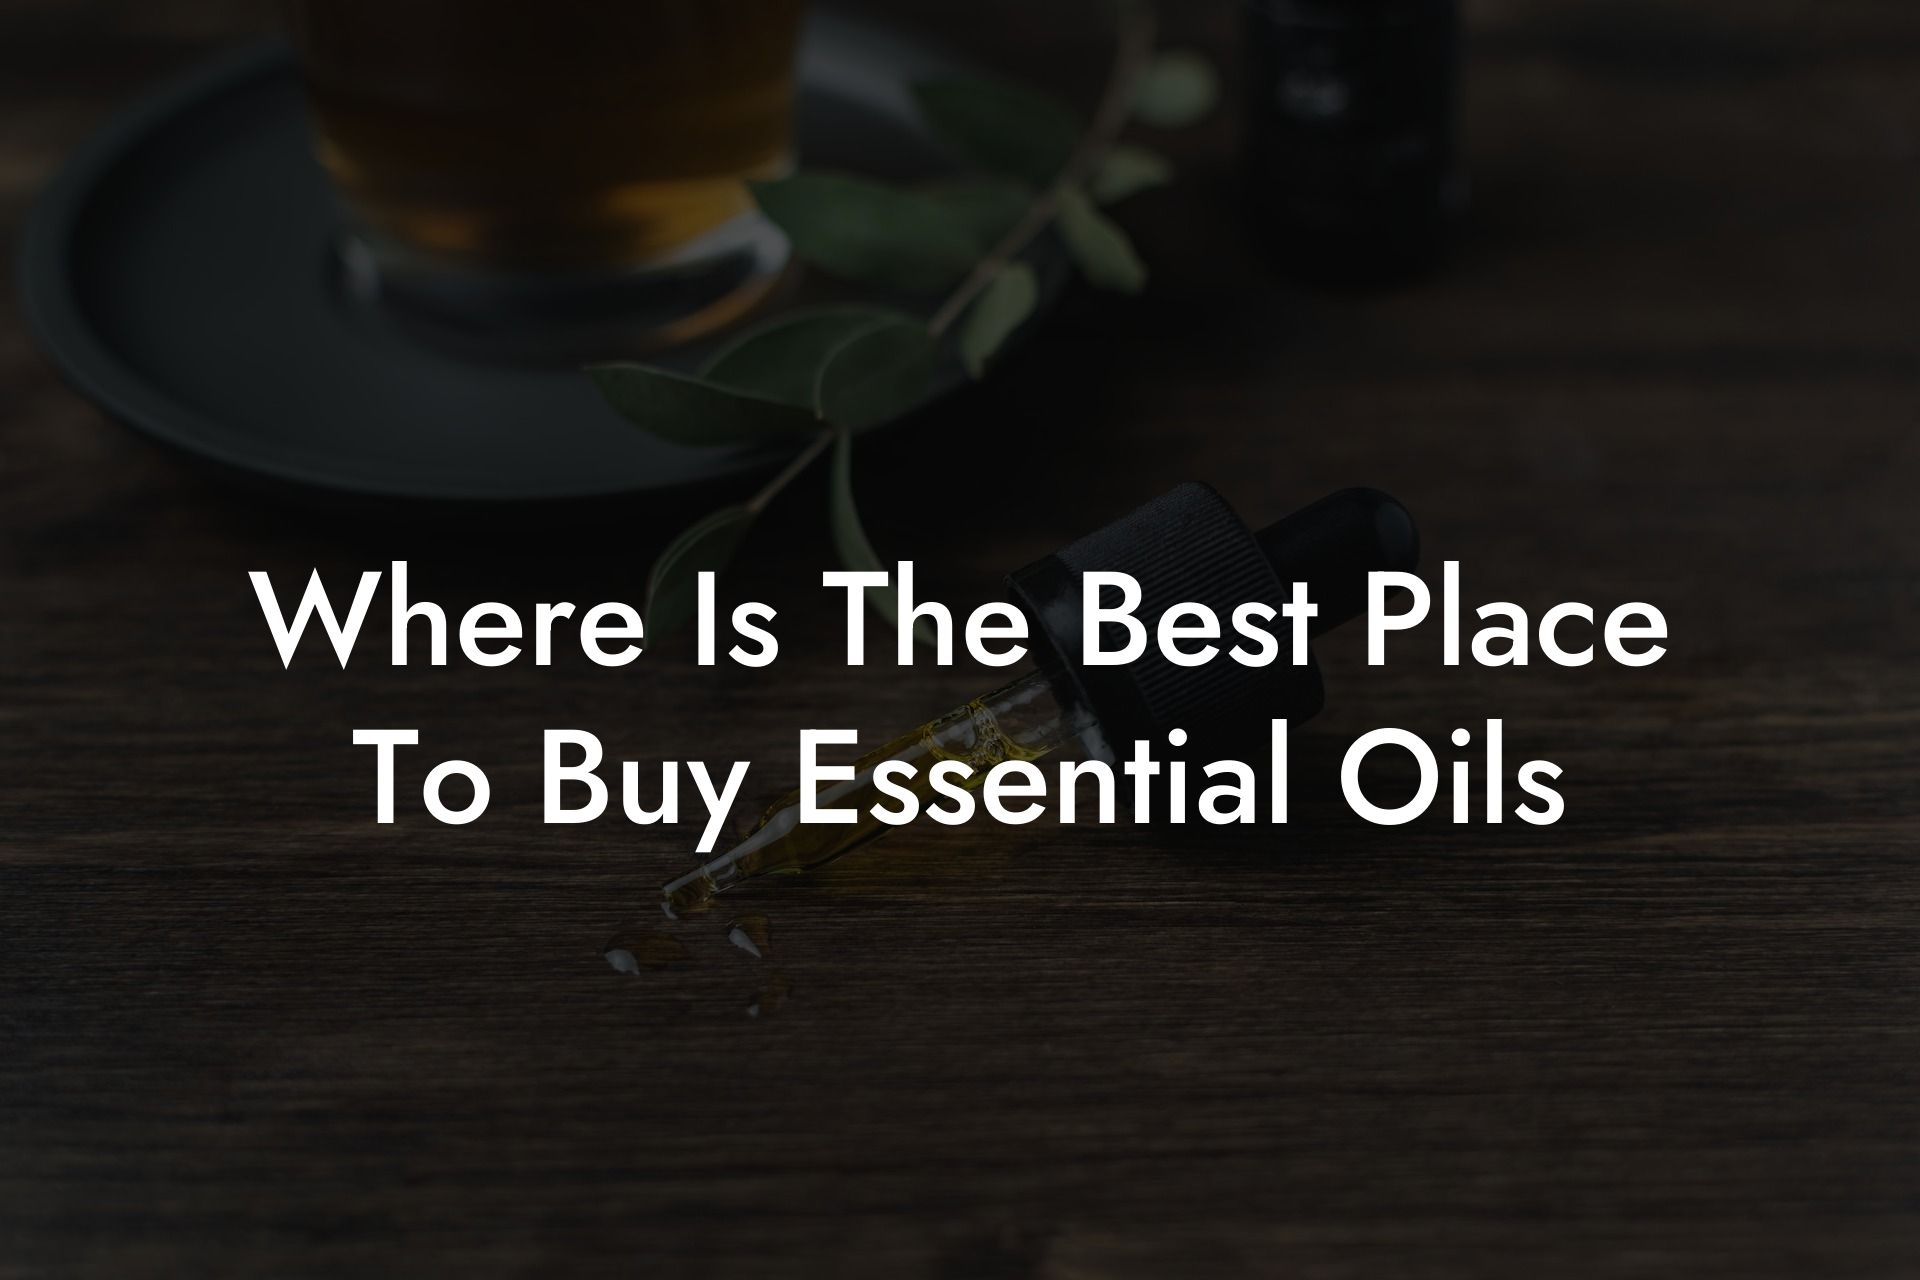 Where Is The Best Place To Buy Essential Oils